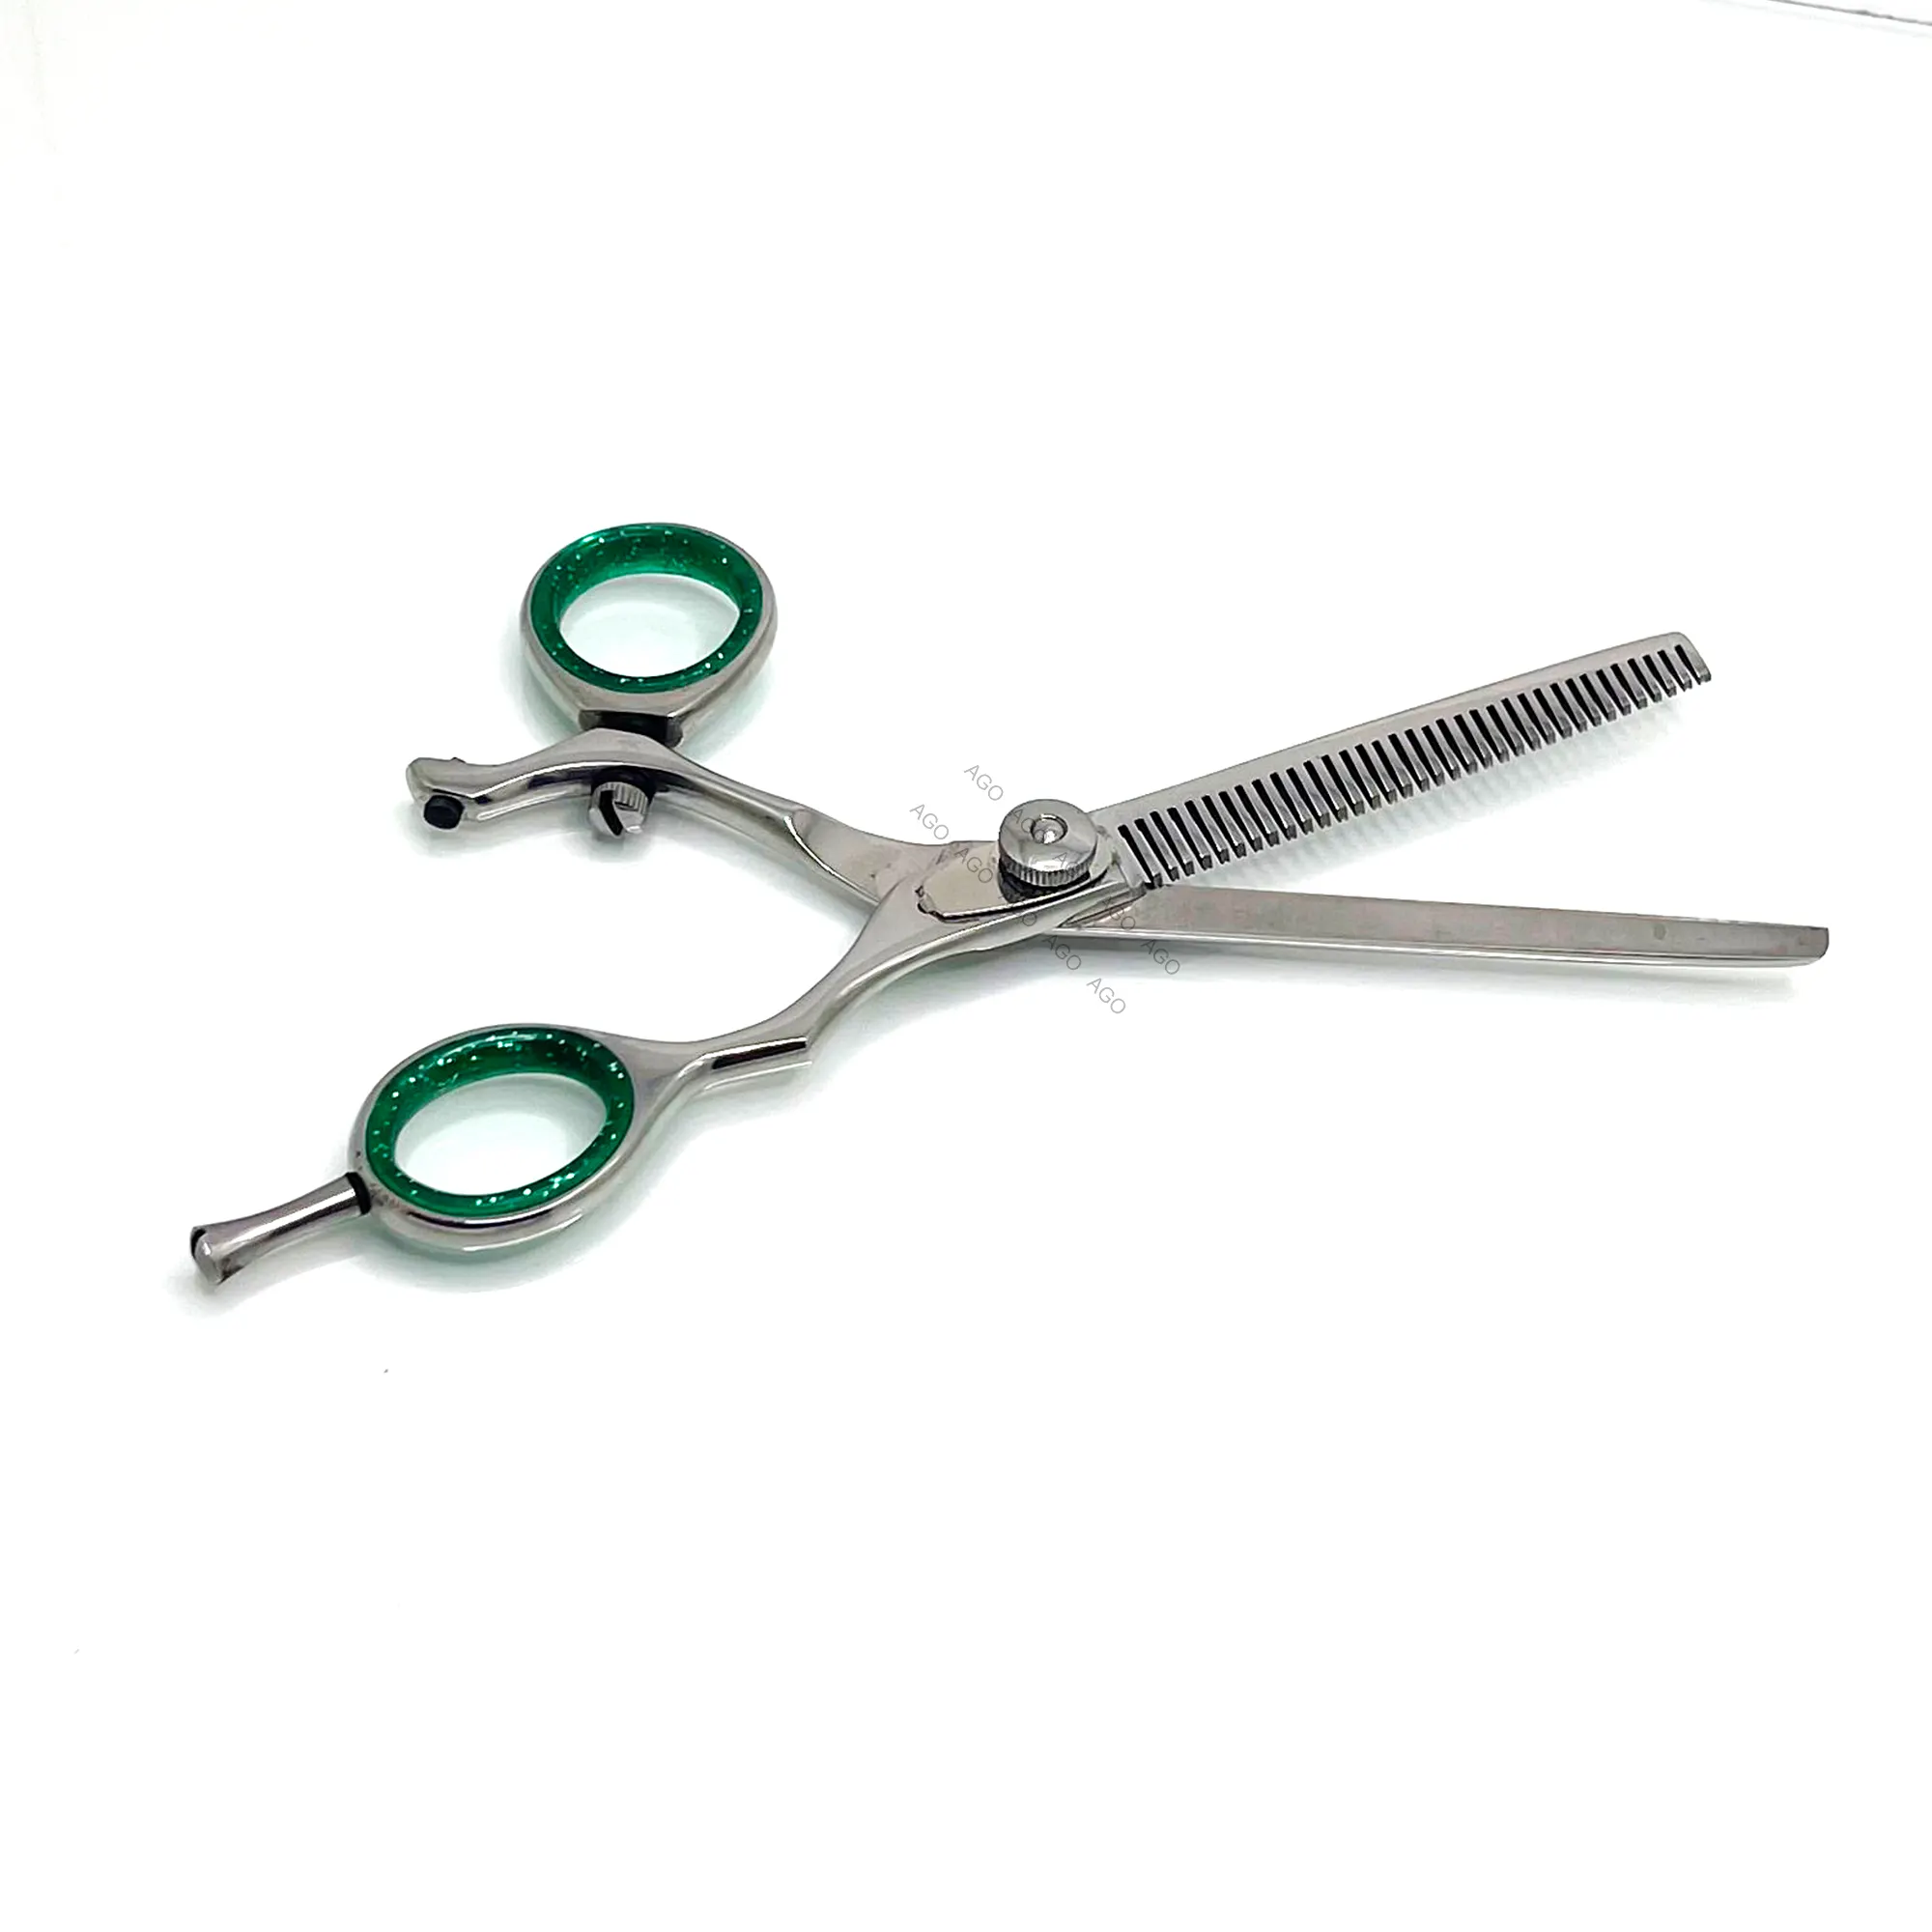 Stainless Steel Professional Hair Cutting Thinning Trimming Barber Shears Under your Private Label